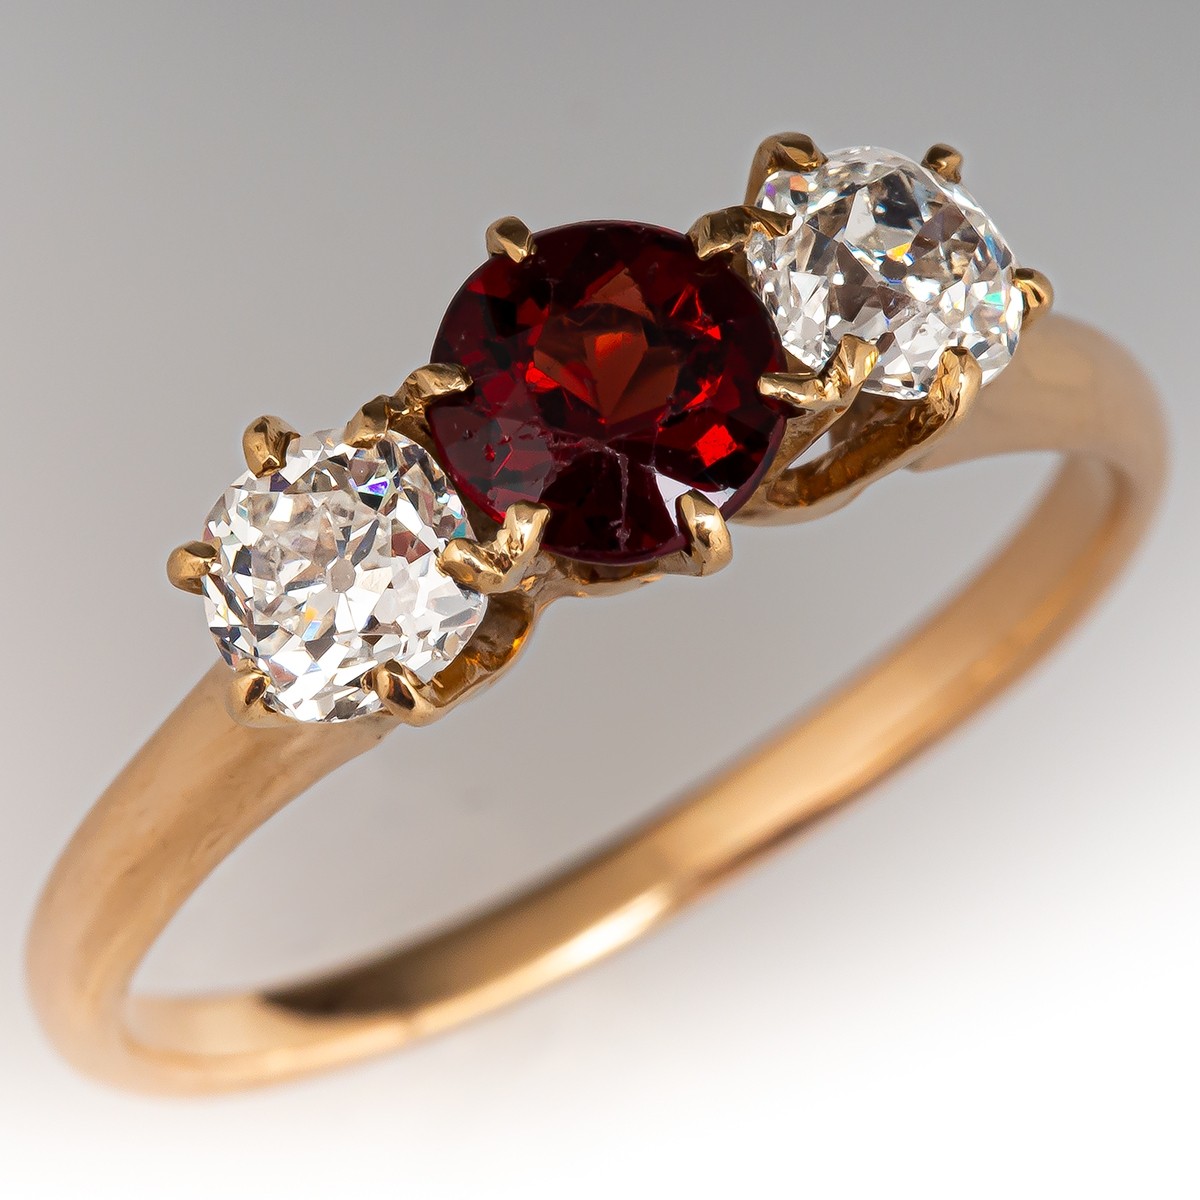 Garnet Ring In Sterling Silver And Gold Vermeil By Vianne Jewellery |  notonthehighstreet.com